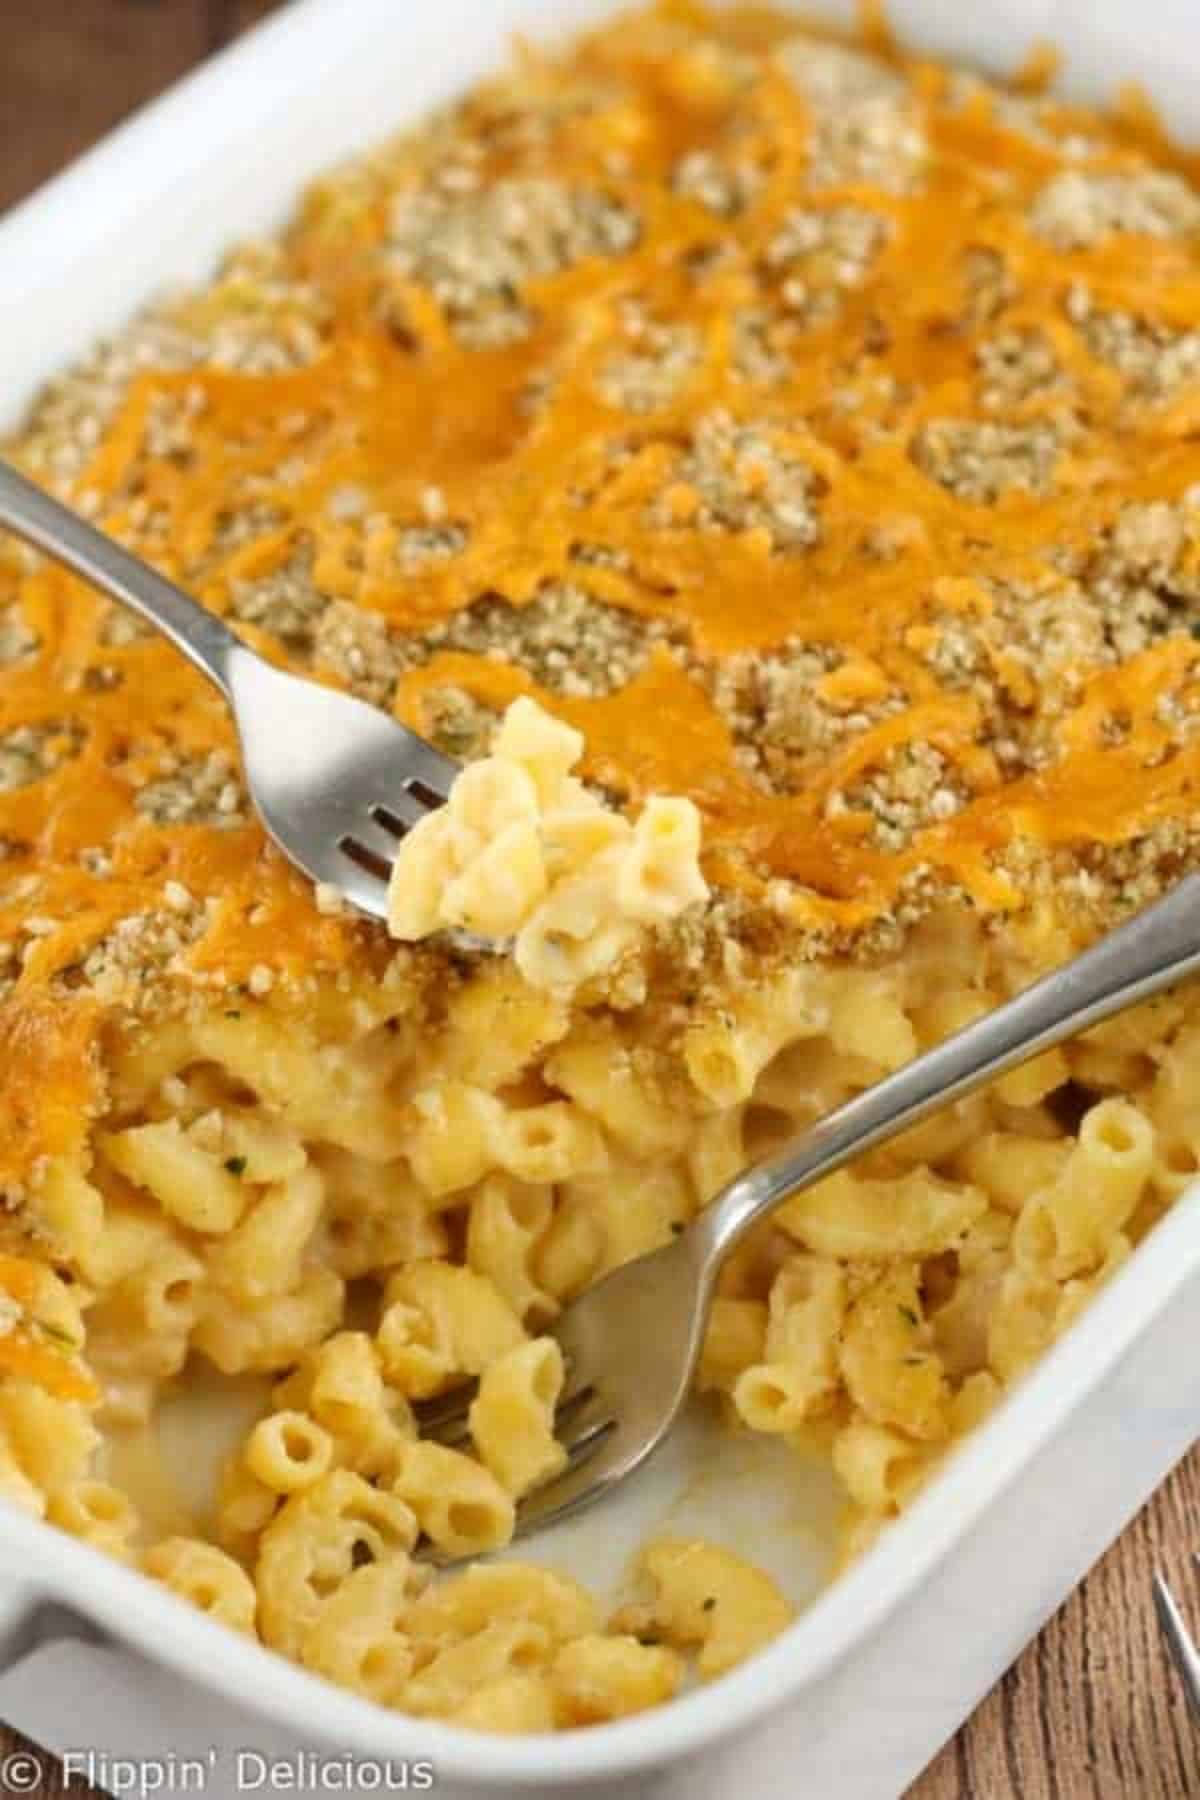 Baked Gluten-Free Mac and Cheese in a white casserole with two forks.